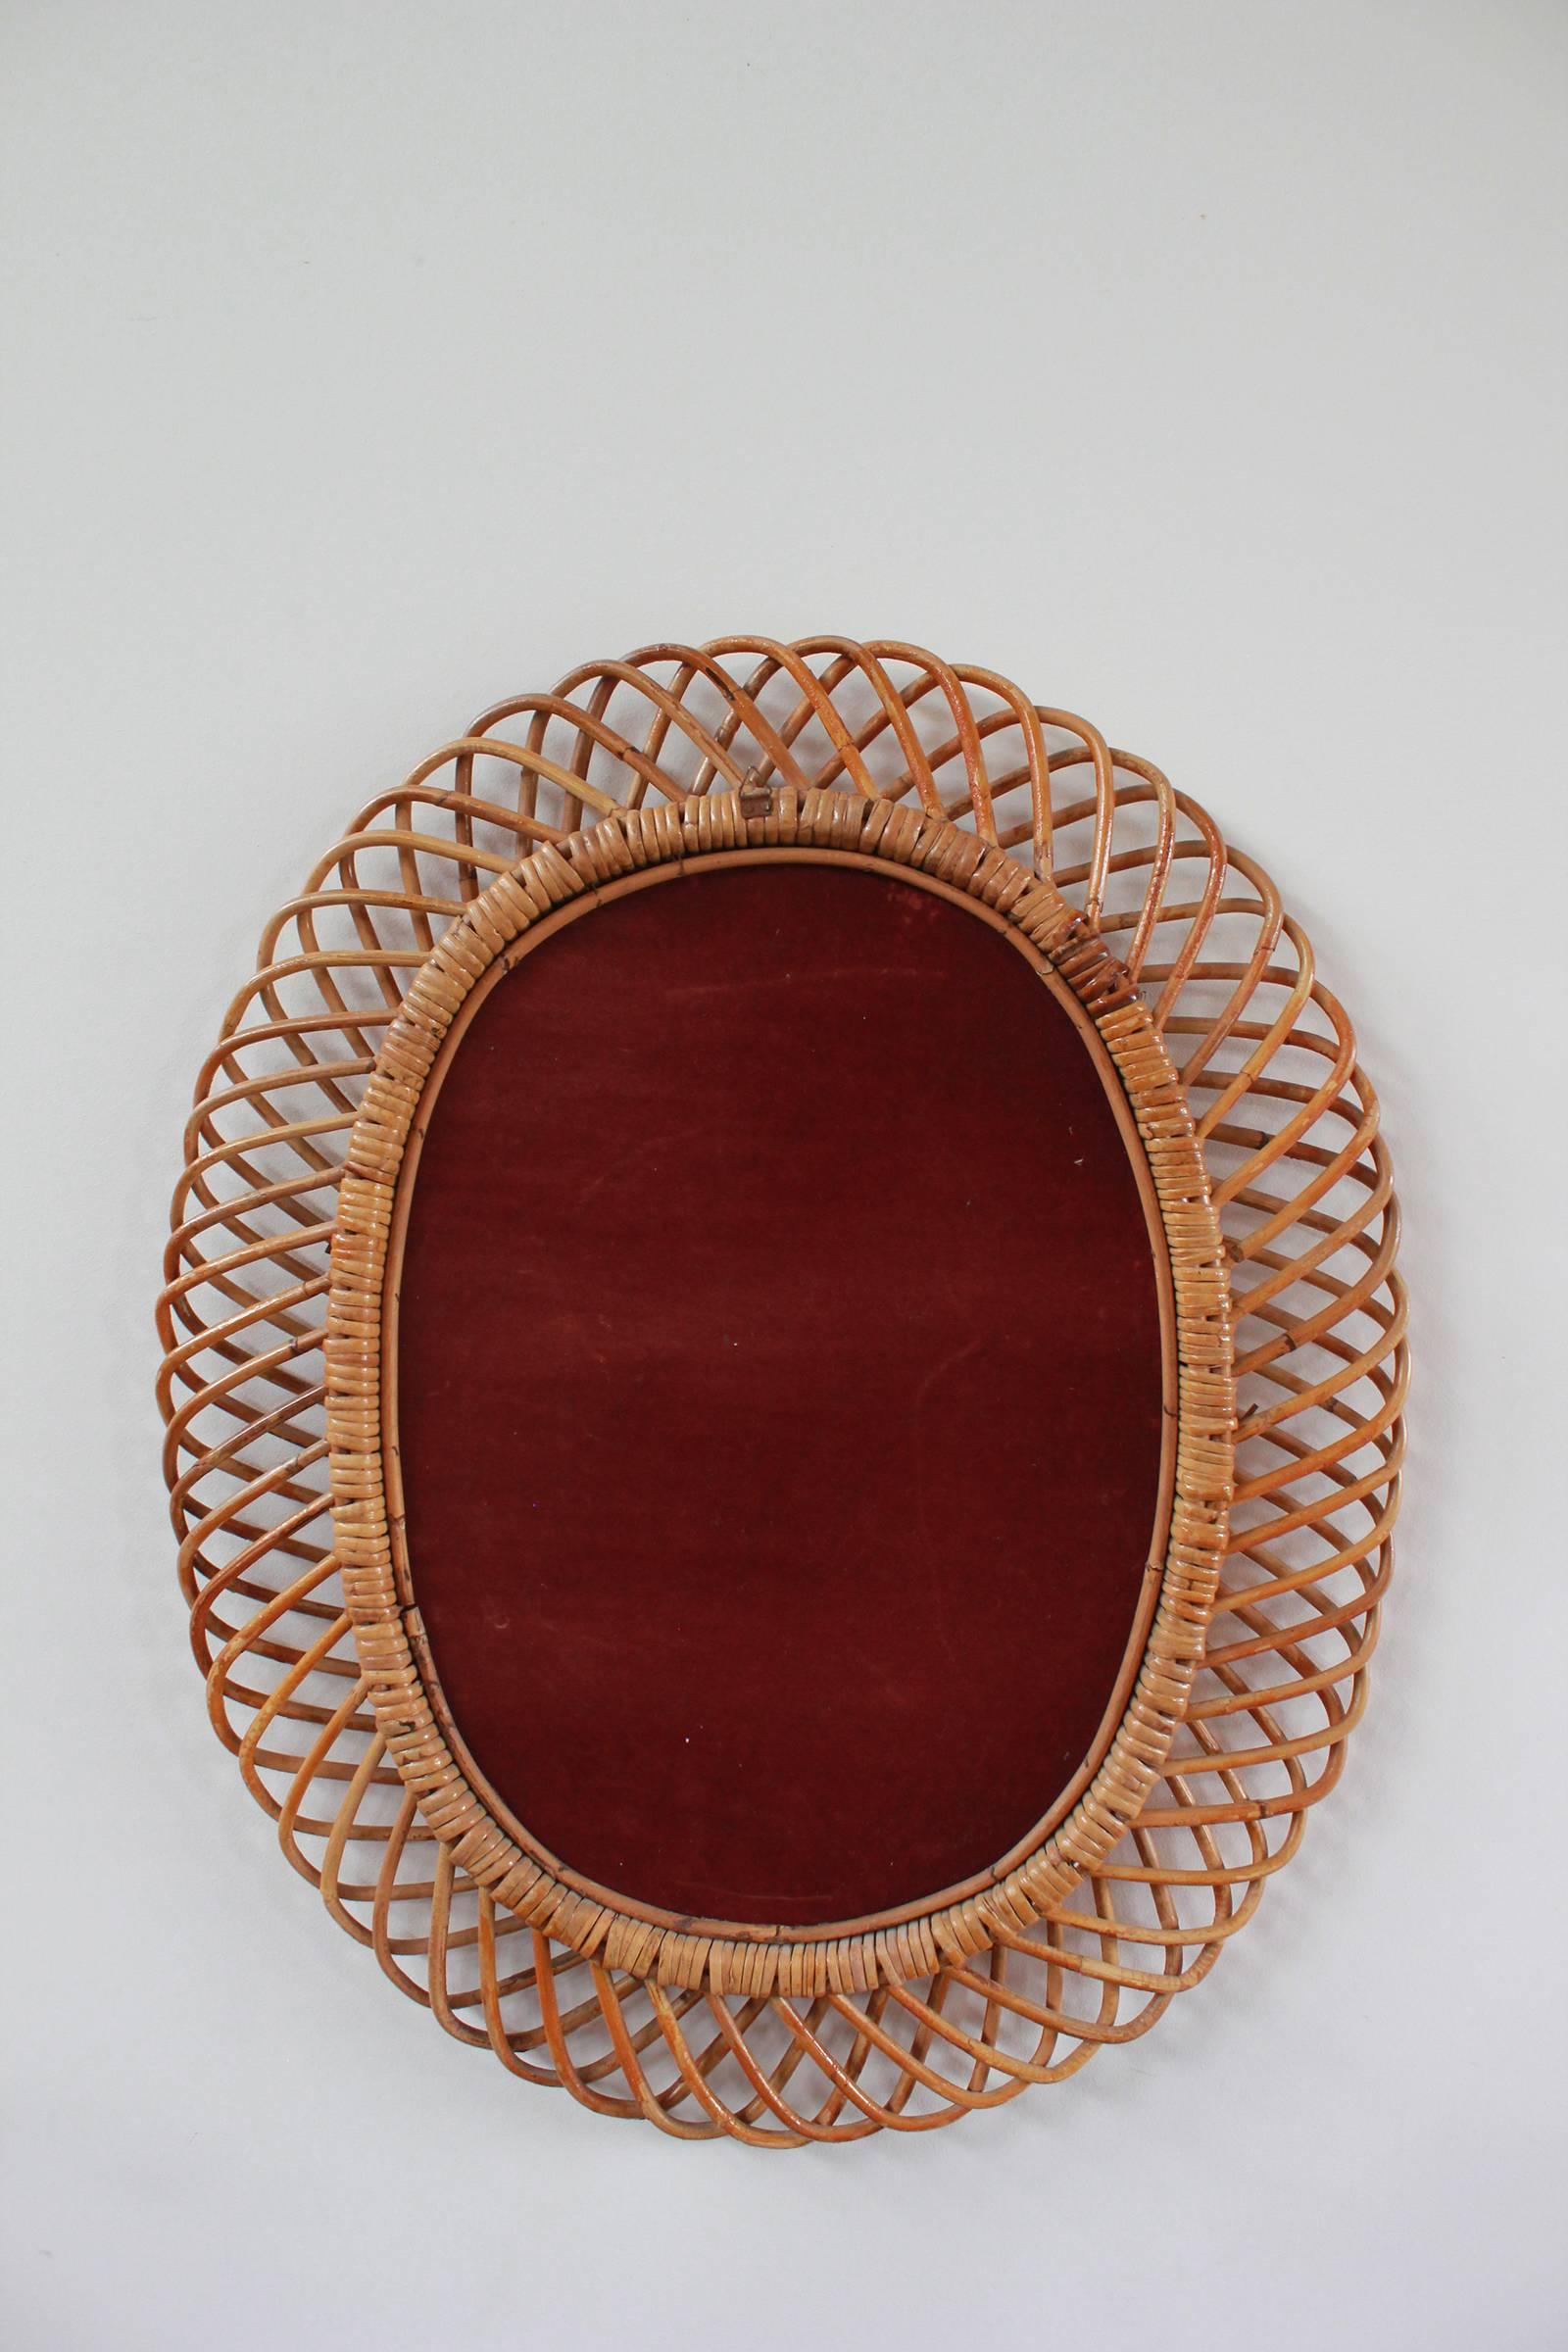 Oval Intricate French Wicker Mirror 1